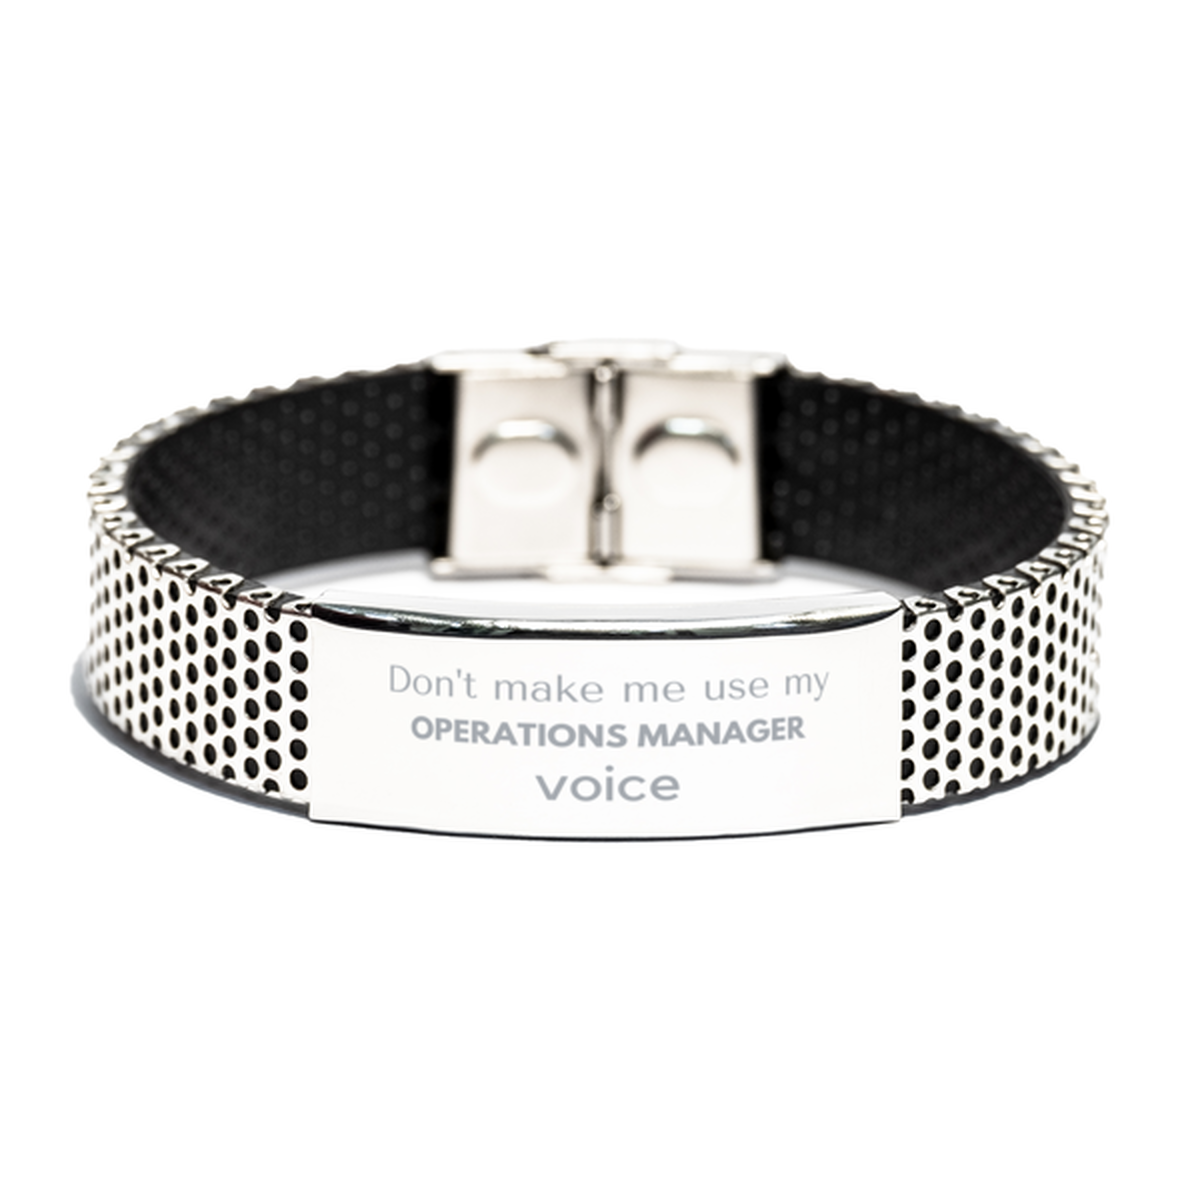 Don't make me use my Operations Manager voice, Sarcasm Operations Manager Gifts, Christmas Operations Manager Stainless Steel Bracelet Birthday Unique Gifts For Operations Manager Coworkers, Men, Women, Colleague, Friends